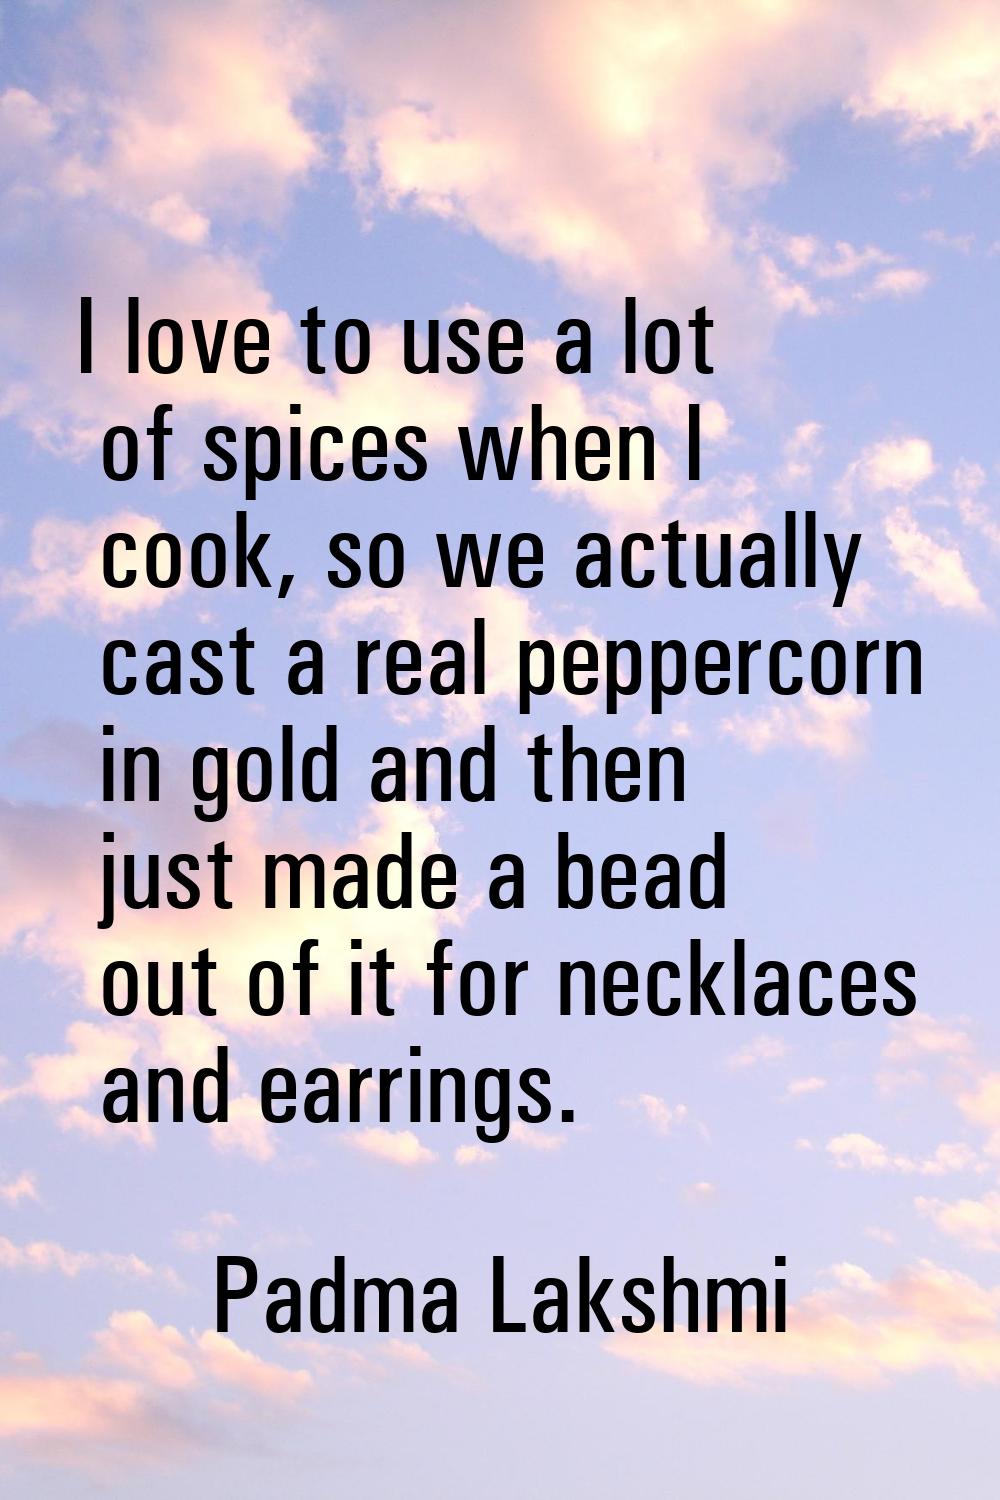 I love to use a lot of spices when I cook, so we actually cast a real peppercorn in gold and then j